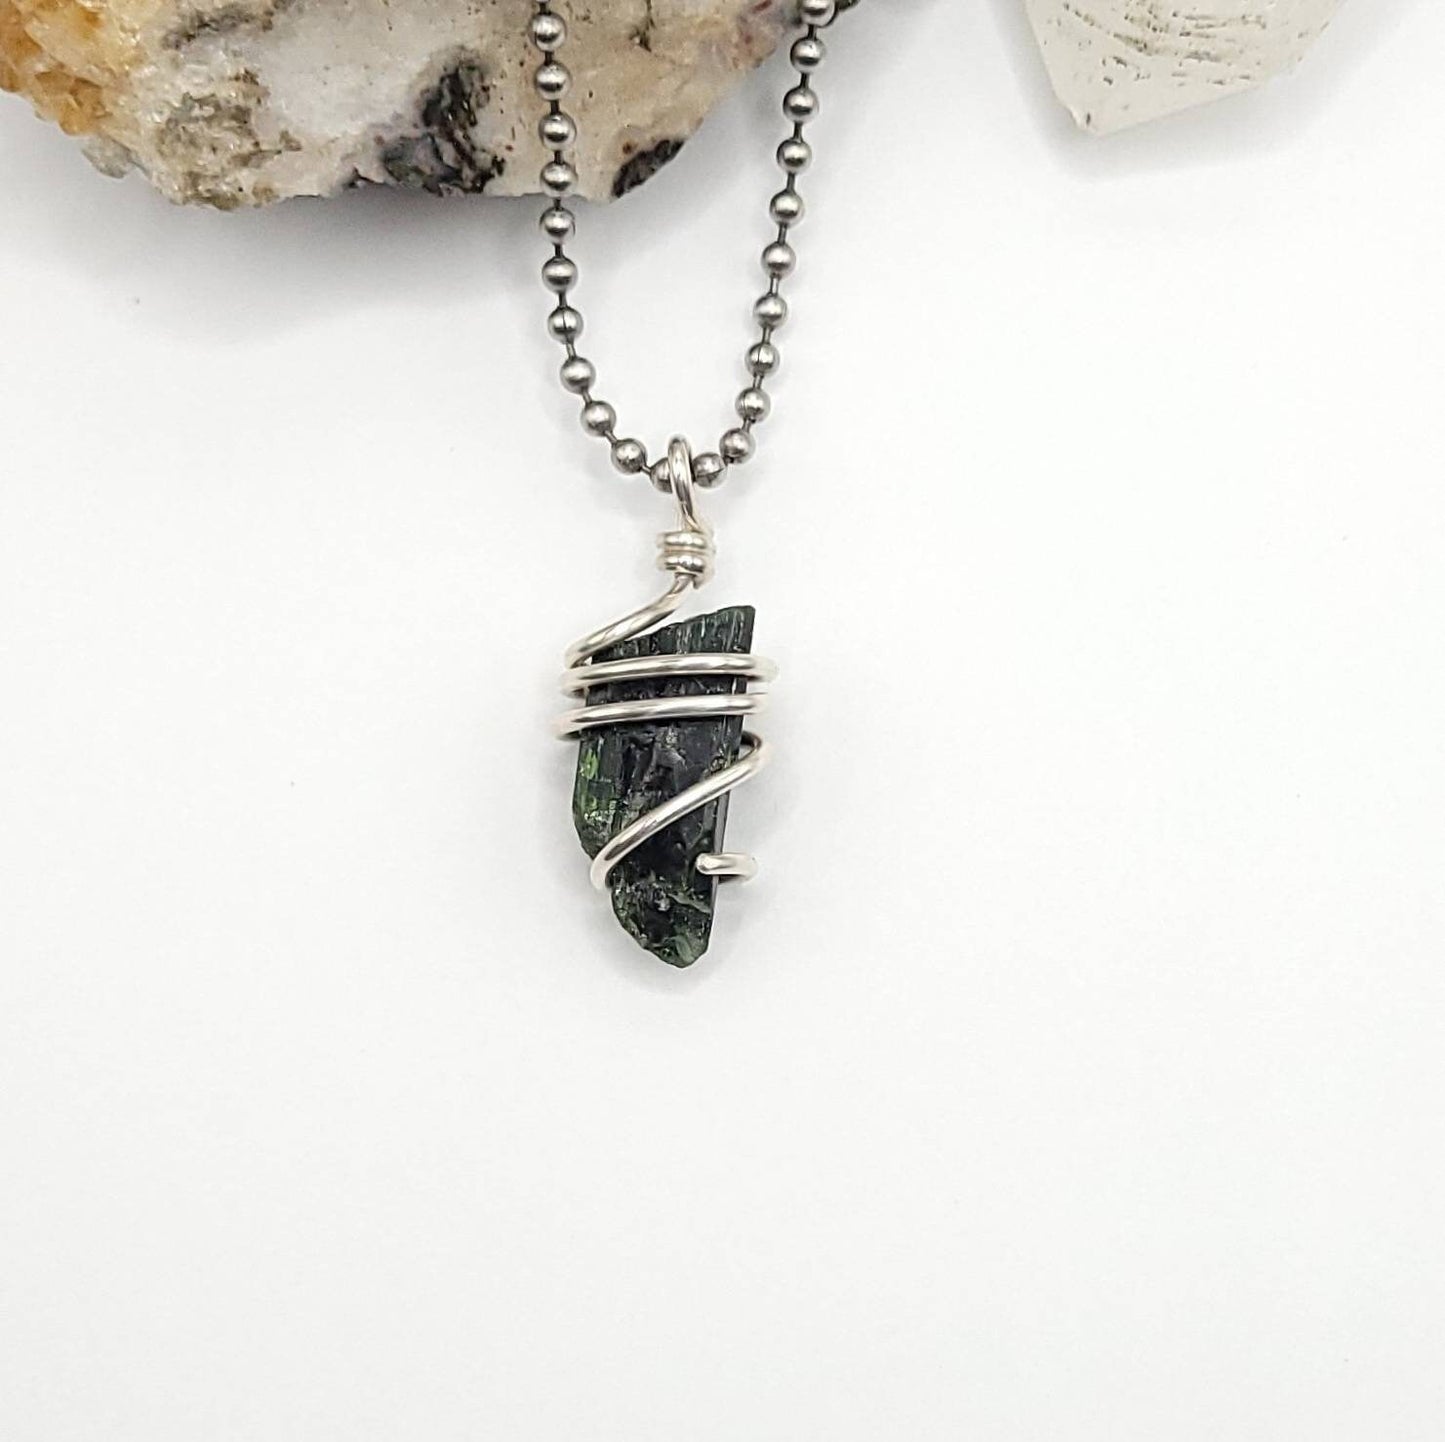 Diopside Necklace, Silver Wire Wrapped Diopside Pendant